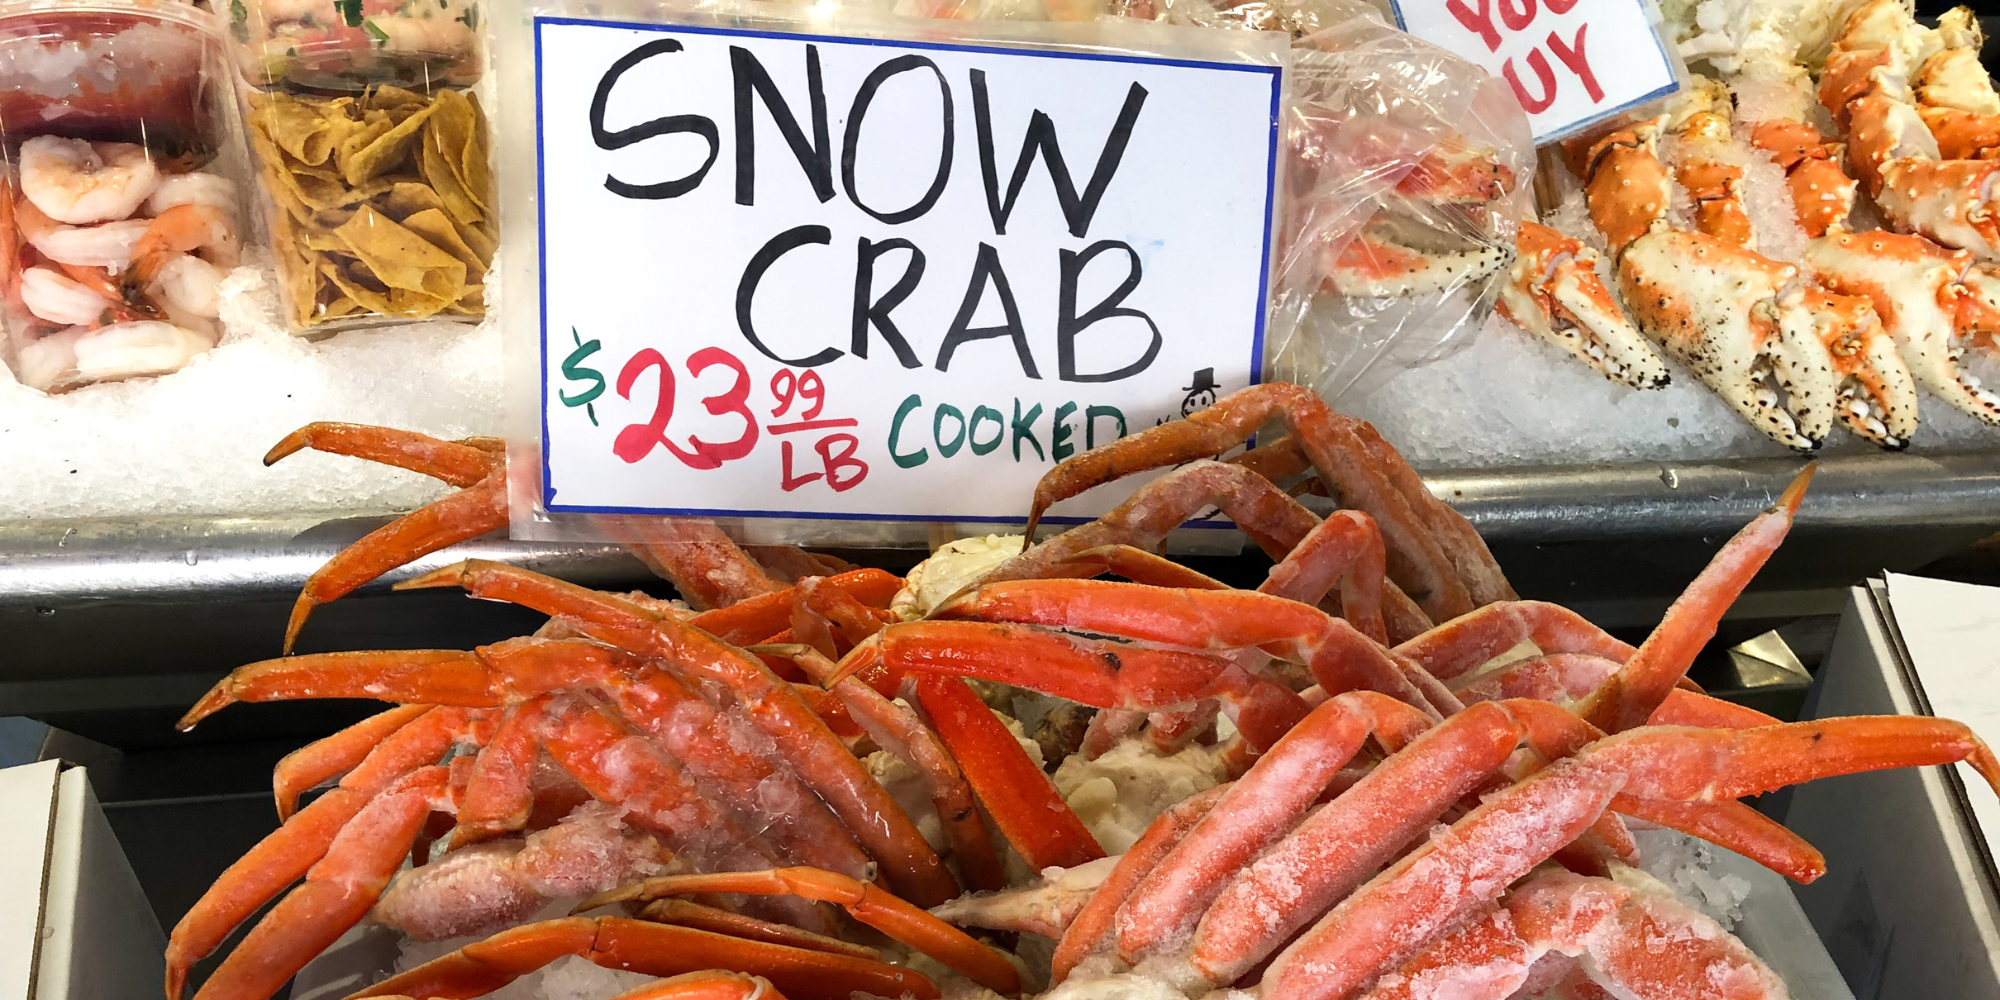 Fishery Sustainability in the Spotlight with Catastrophic Loss of Snow Crab in Alaska